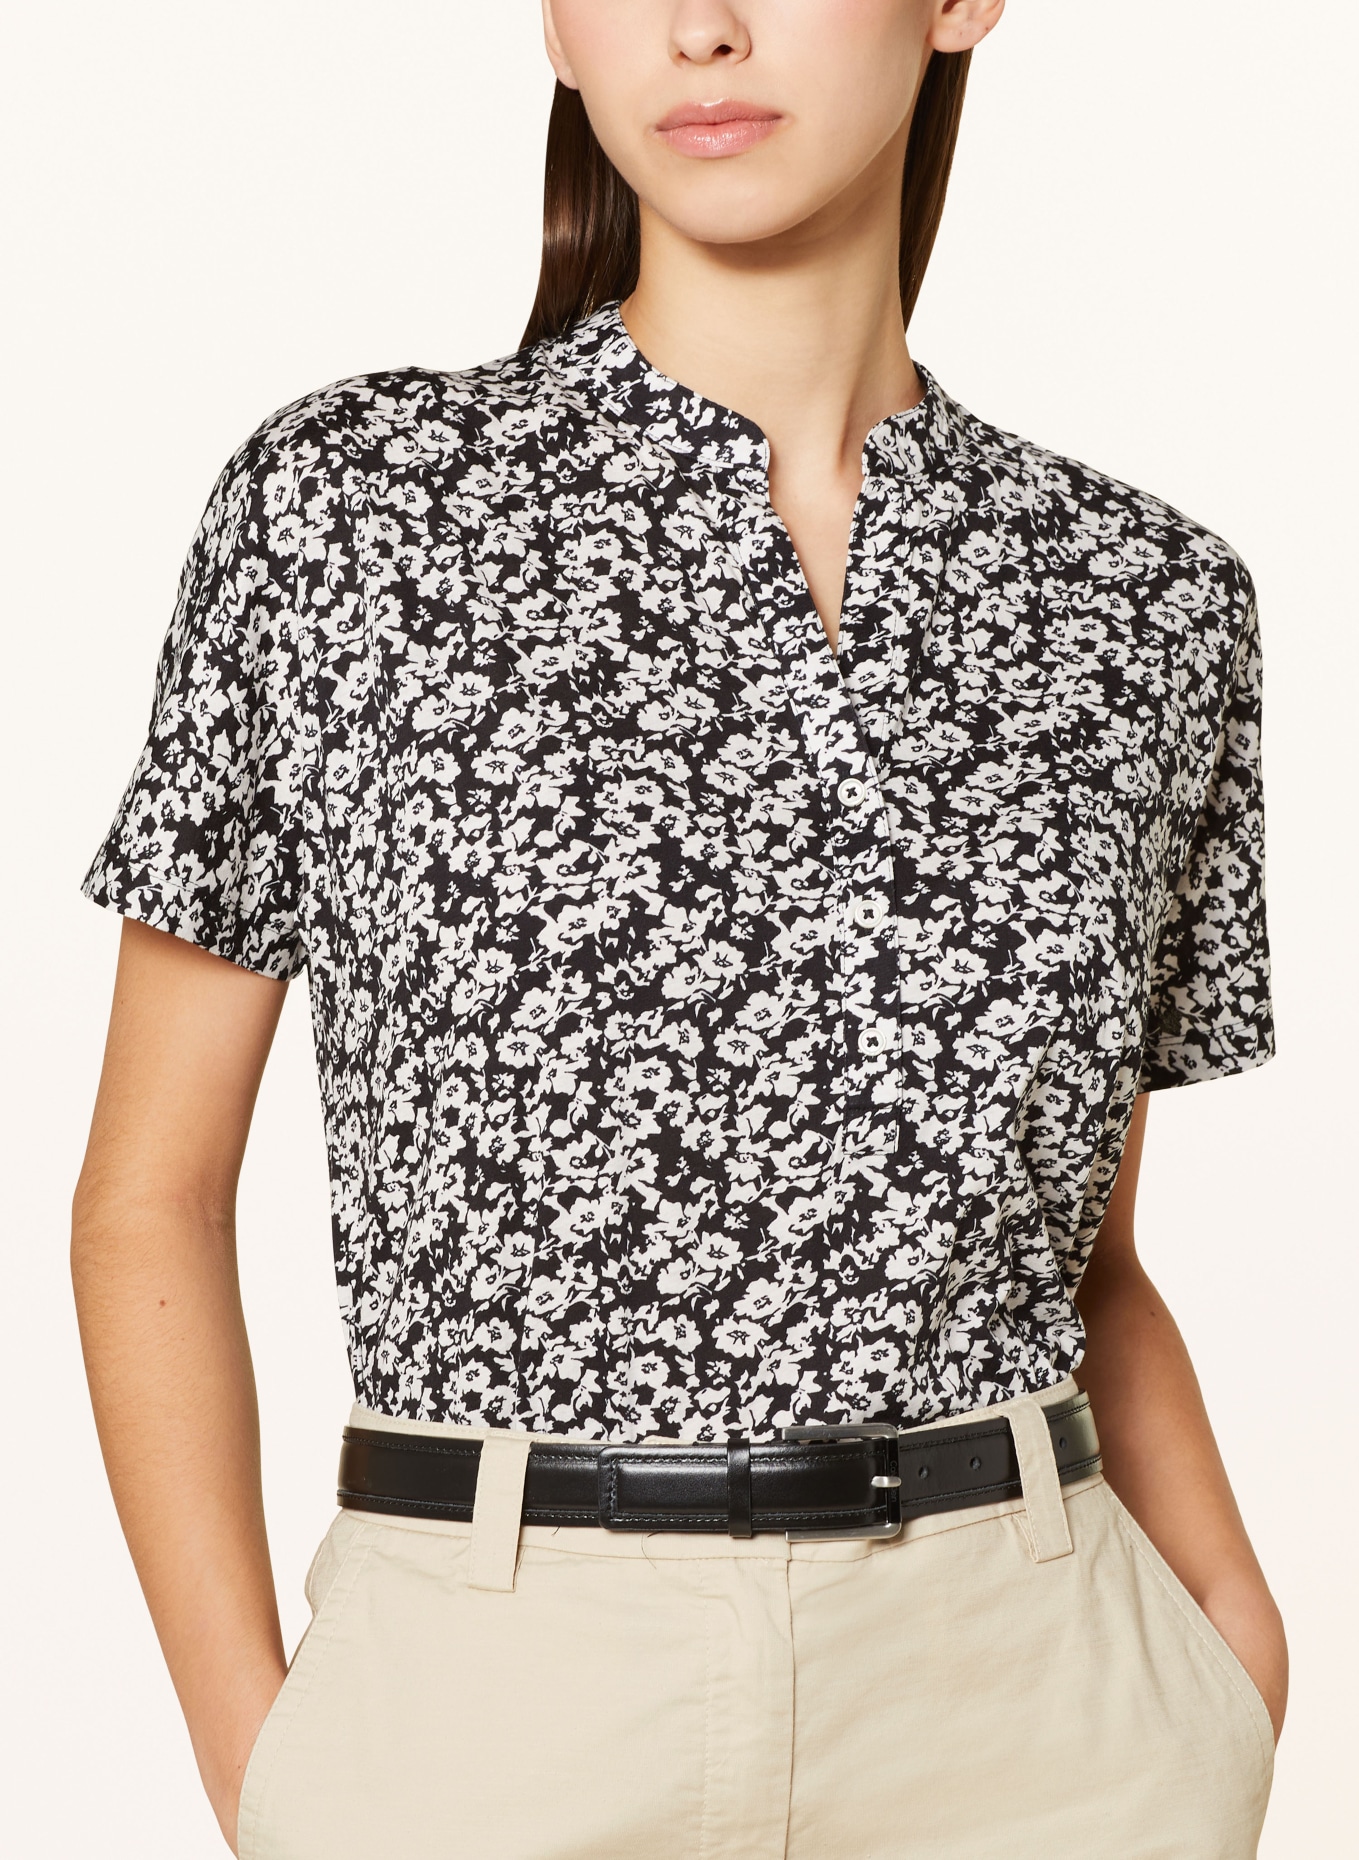 Marc O'Polo Shirt blouse made of jersey, Color: BLACK/ WHITE (Image 4)